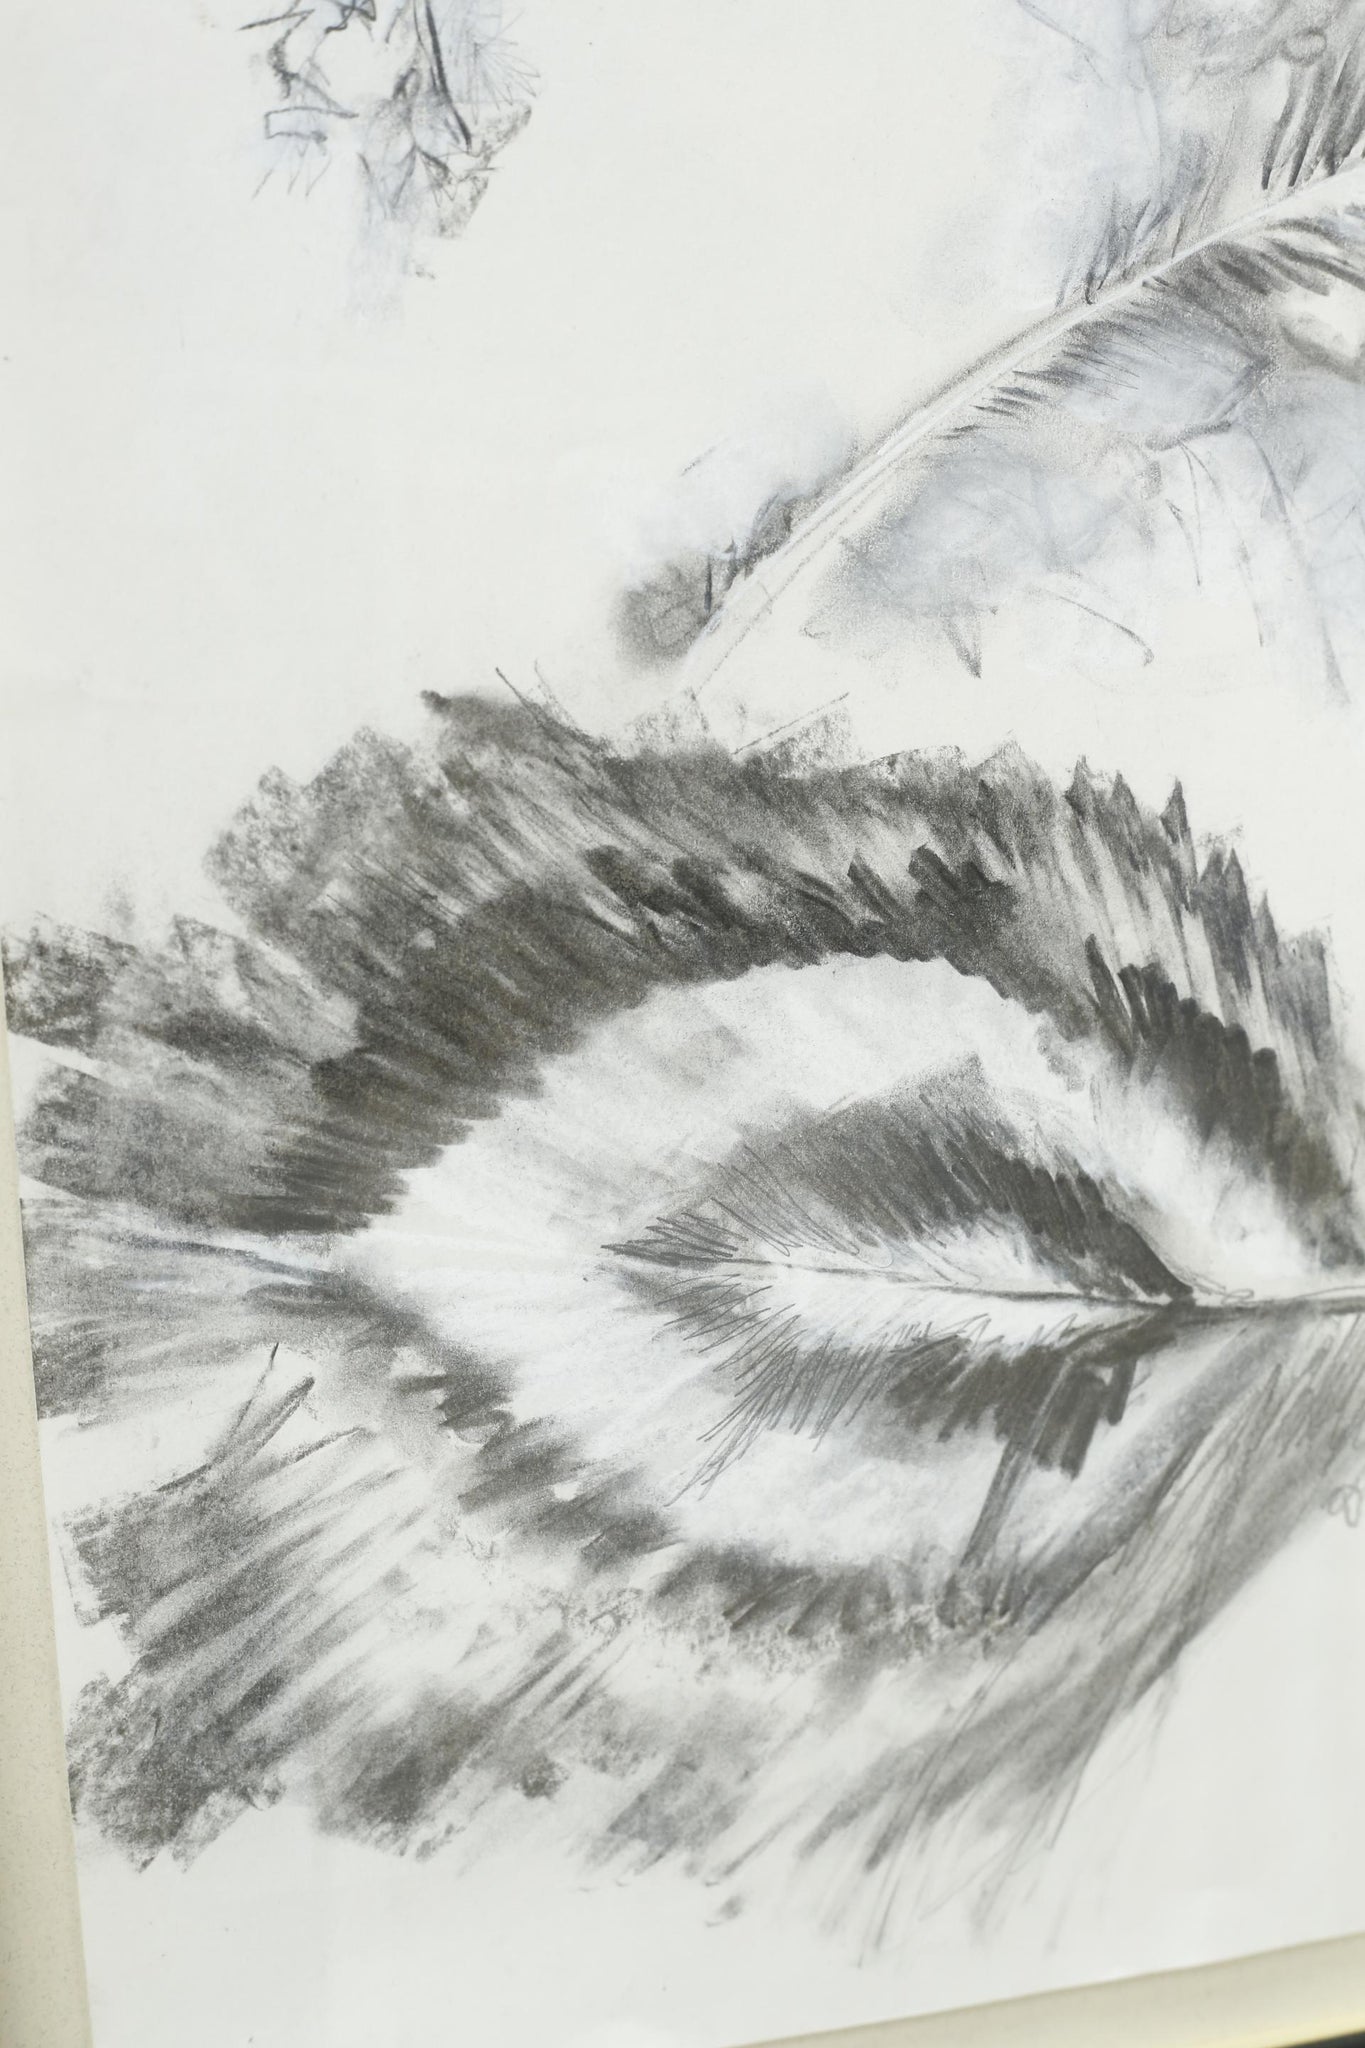 21st century Charcoal and chalk artwork - Feathers 2